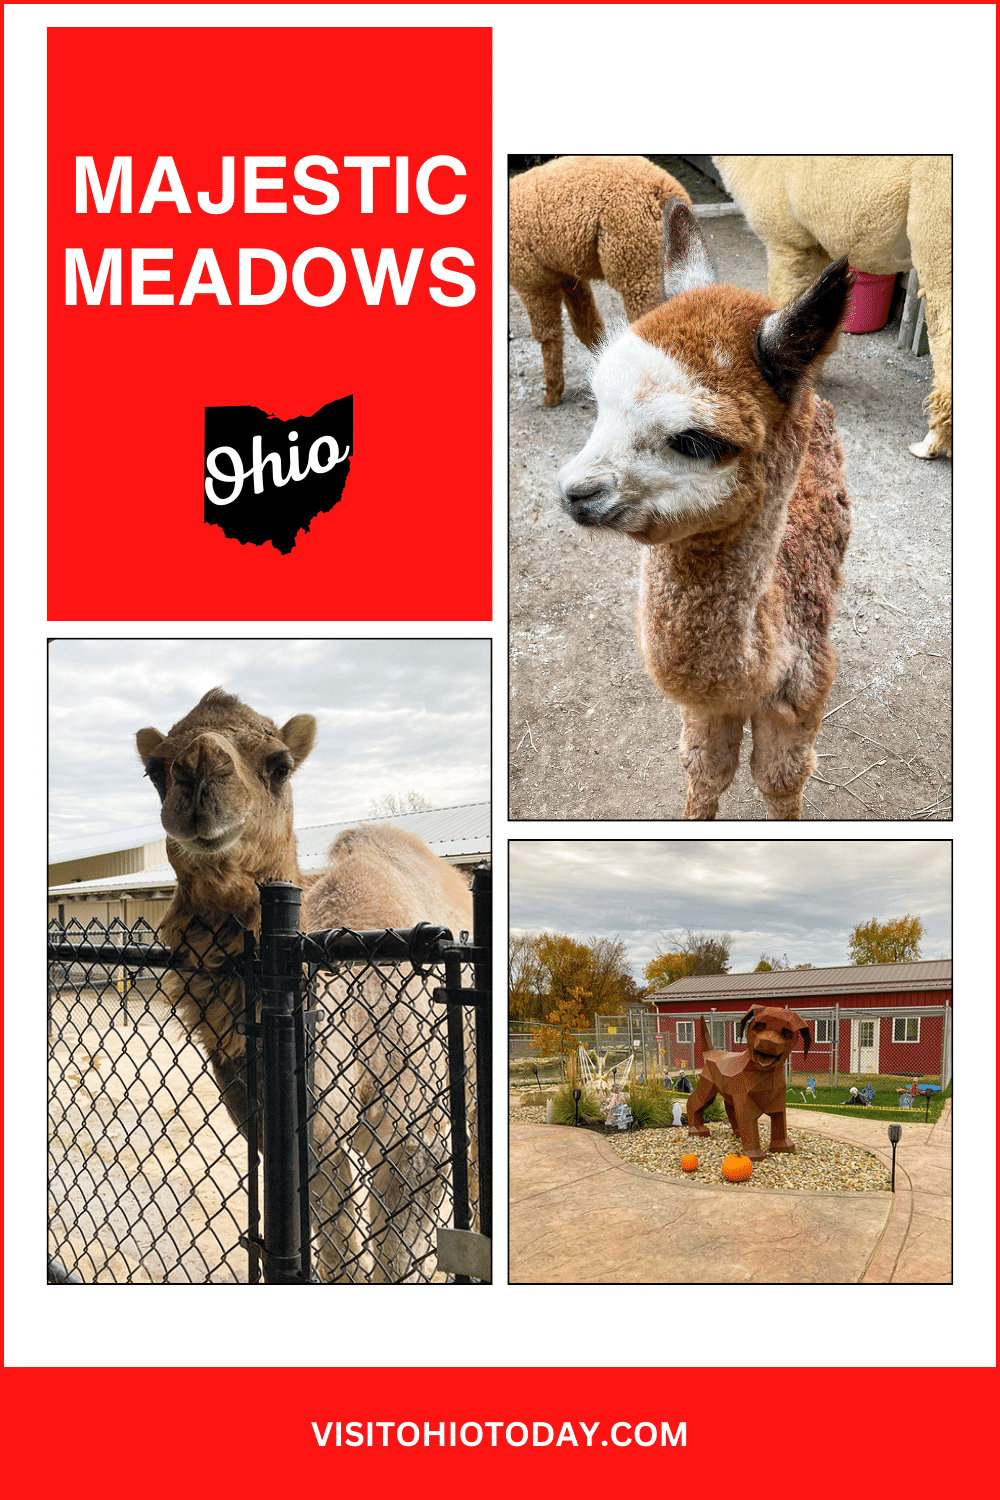 Experience the charm of Majestic Meadows, an alpaca farm nestled in scenic Medina! Get up close and personal with adorable alpacas and a variety of other animals like llamas, miniature horses, and donkeys. Hand-feed these gentle creatures and create memories to cherish forever! #MajesticMeadows #AlpacaFarm #MedinaOhio